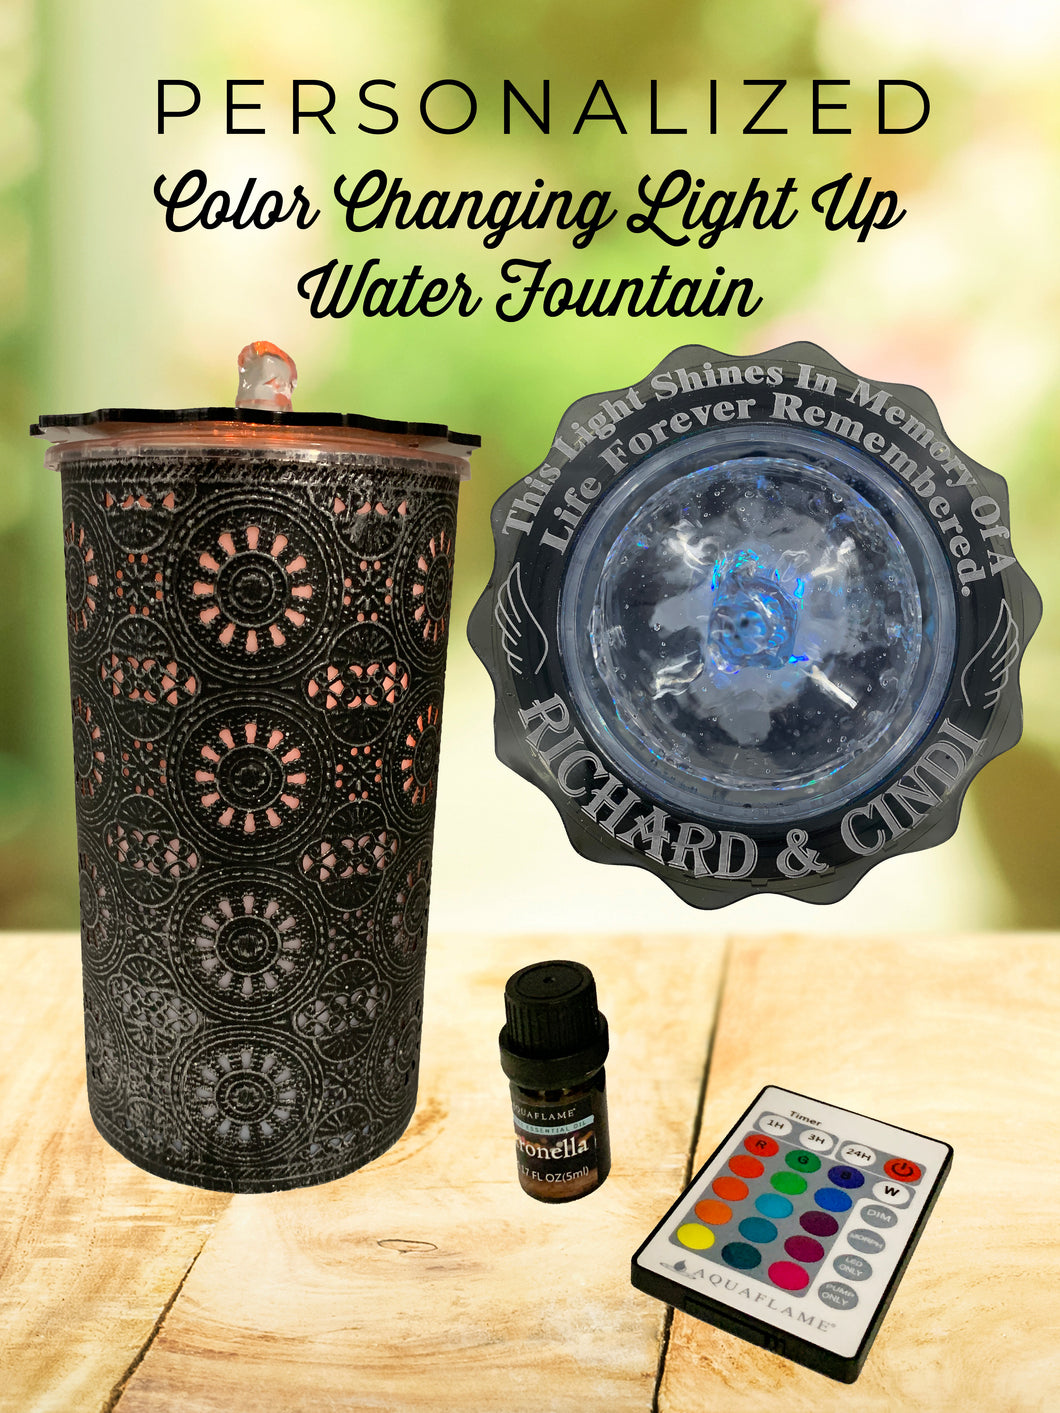 Custom Memorial Water Fountain, Color Changing, Light Up “This Light Shines in Memory of a Life Forever Remembered